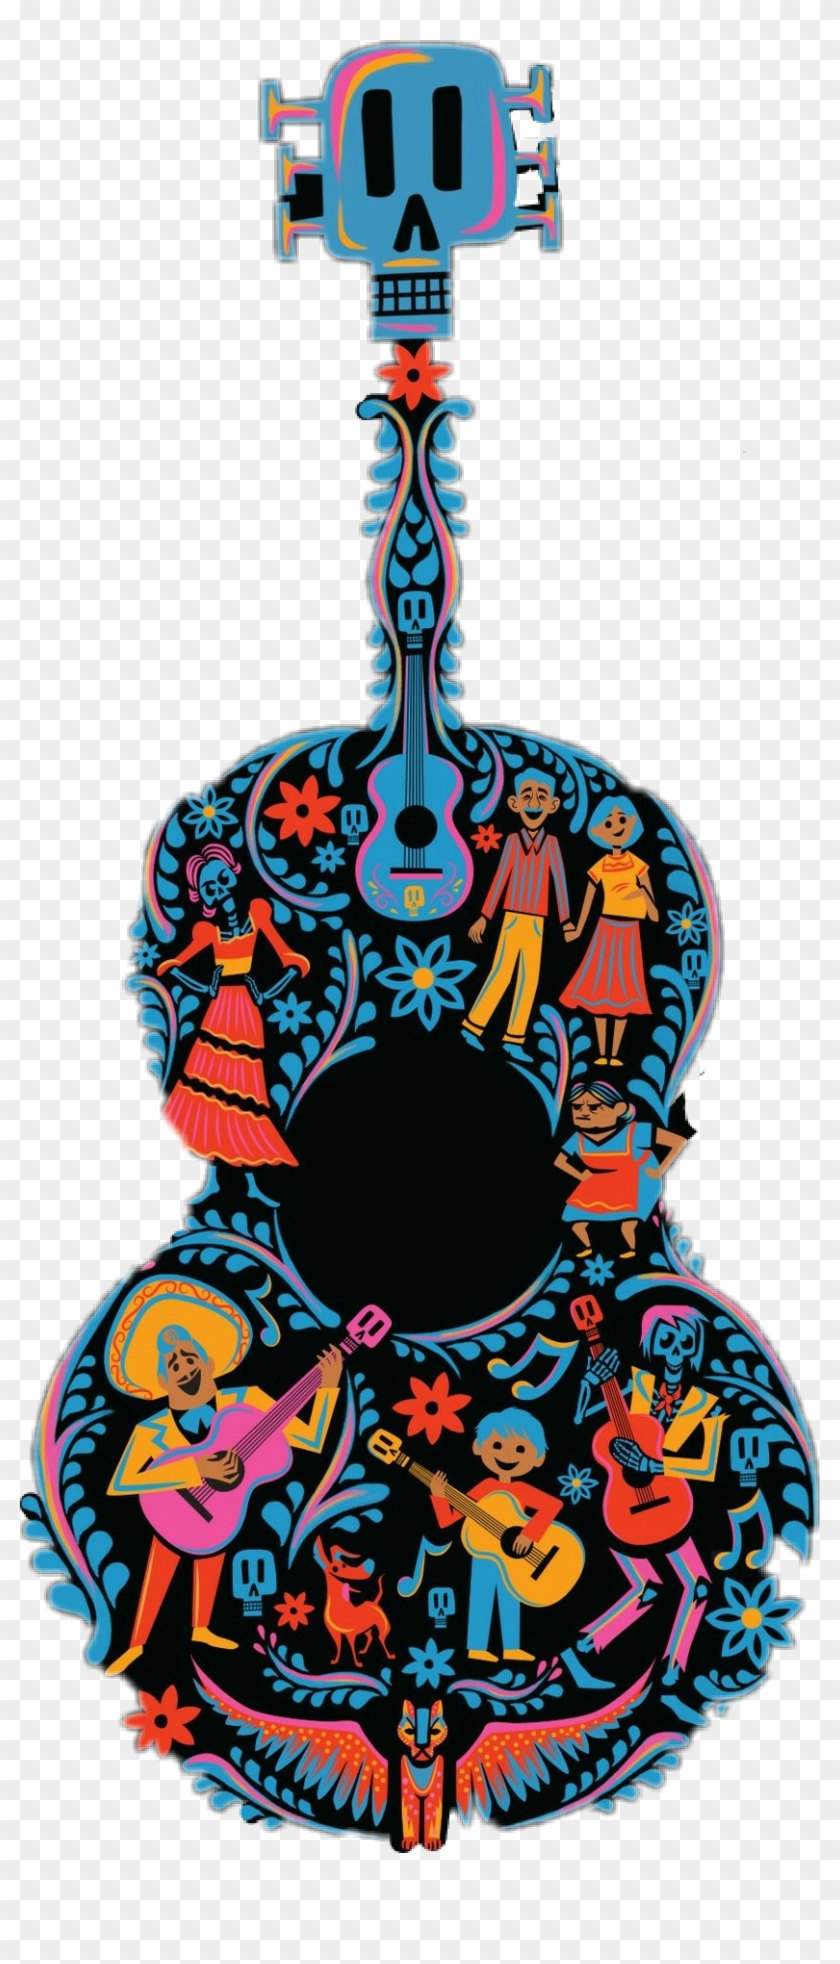 Disney Clipart For T Shirts - Coco Guitar - Png Download #5571596